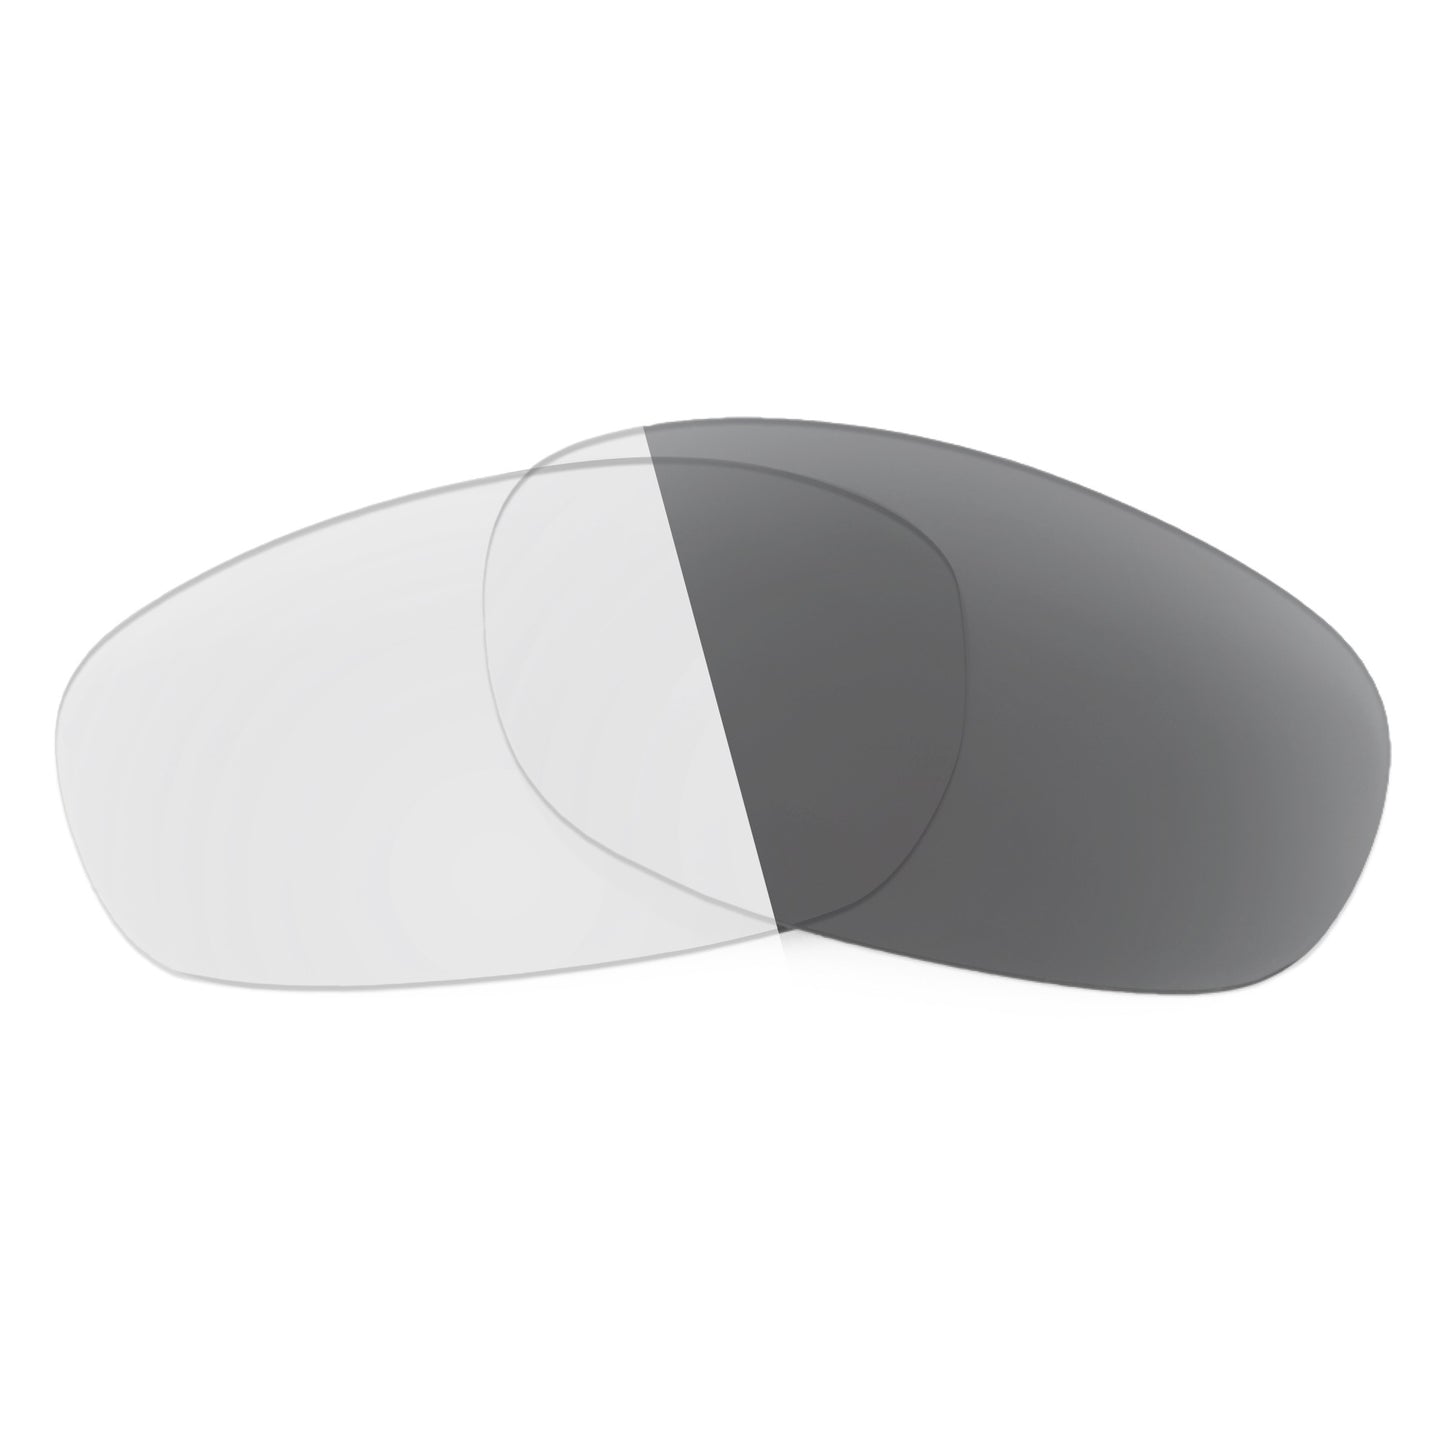 Revant replacement lenses for Ray-Ban RB3566 65mm Non-Polarized Adapt Gray Photochromic